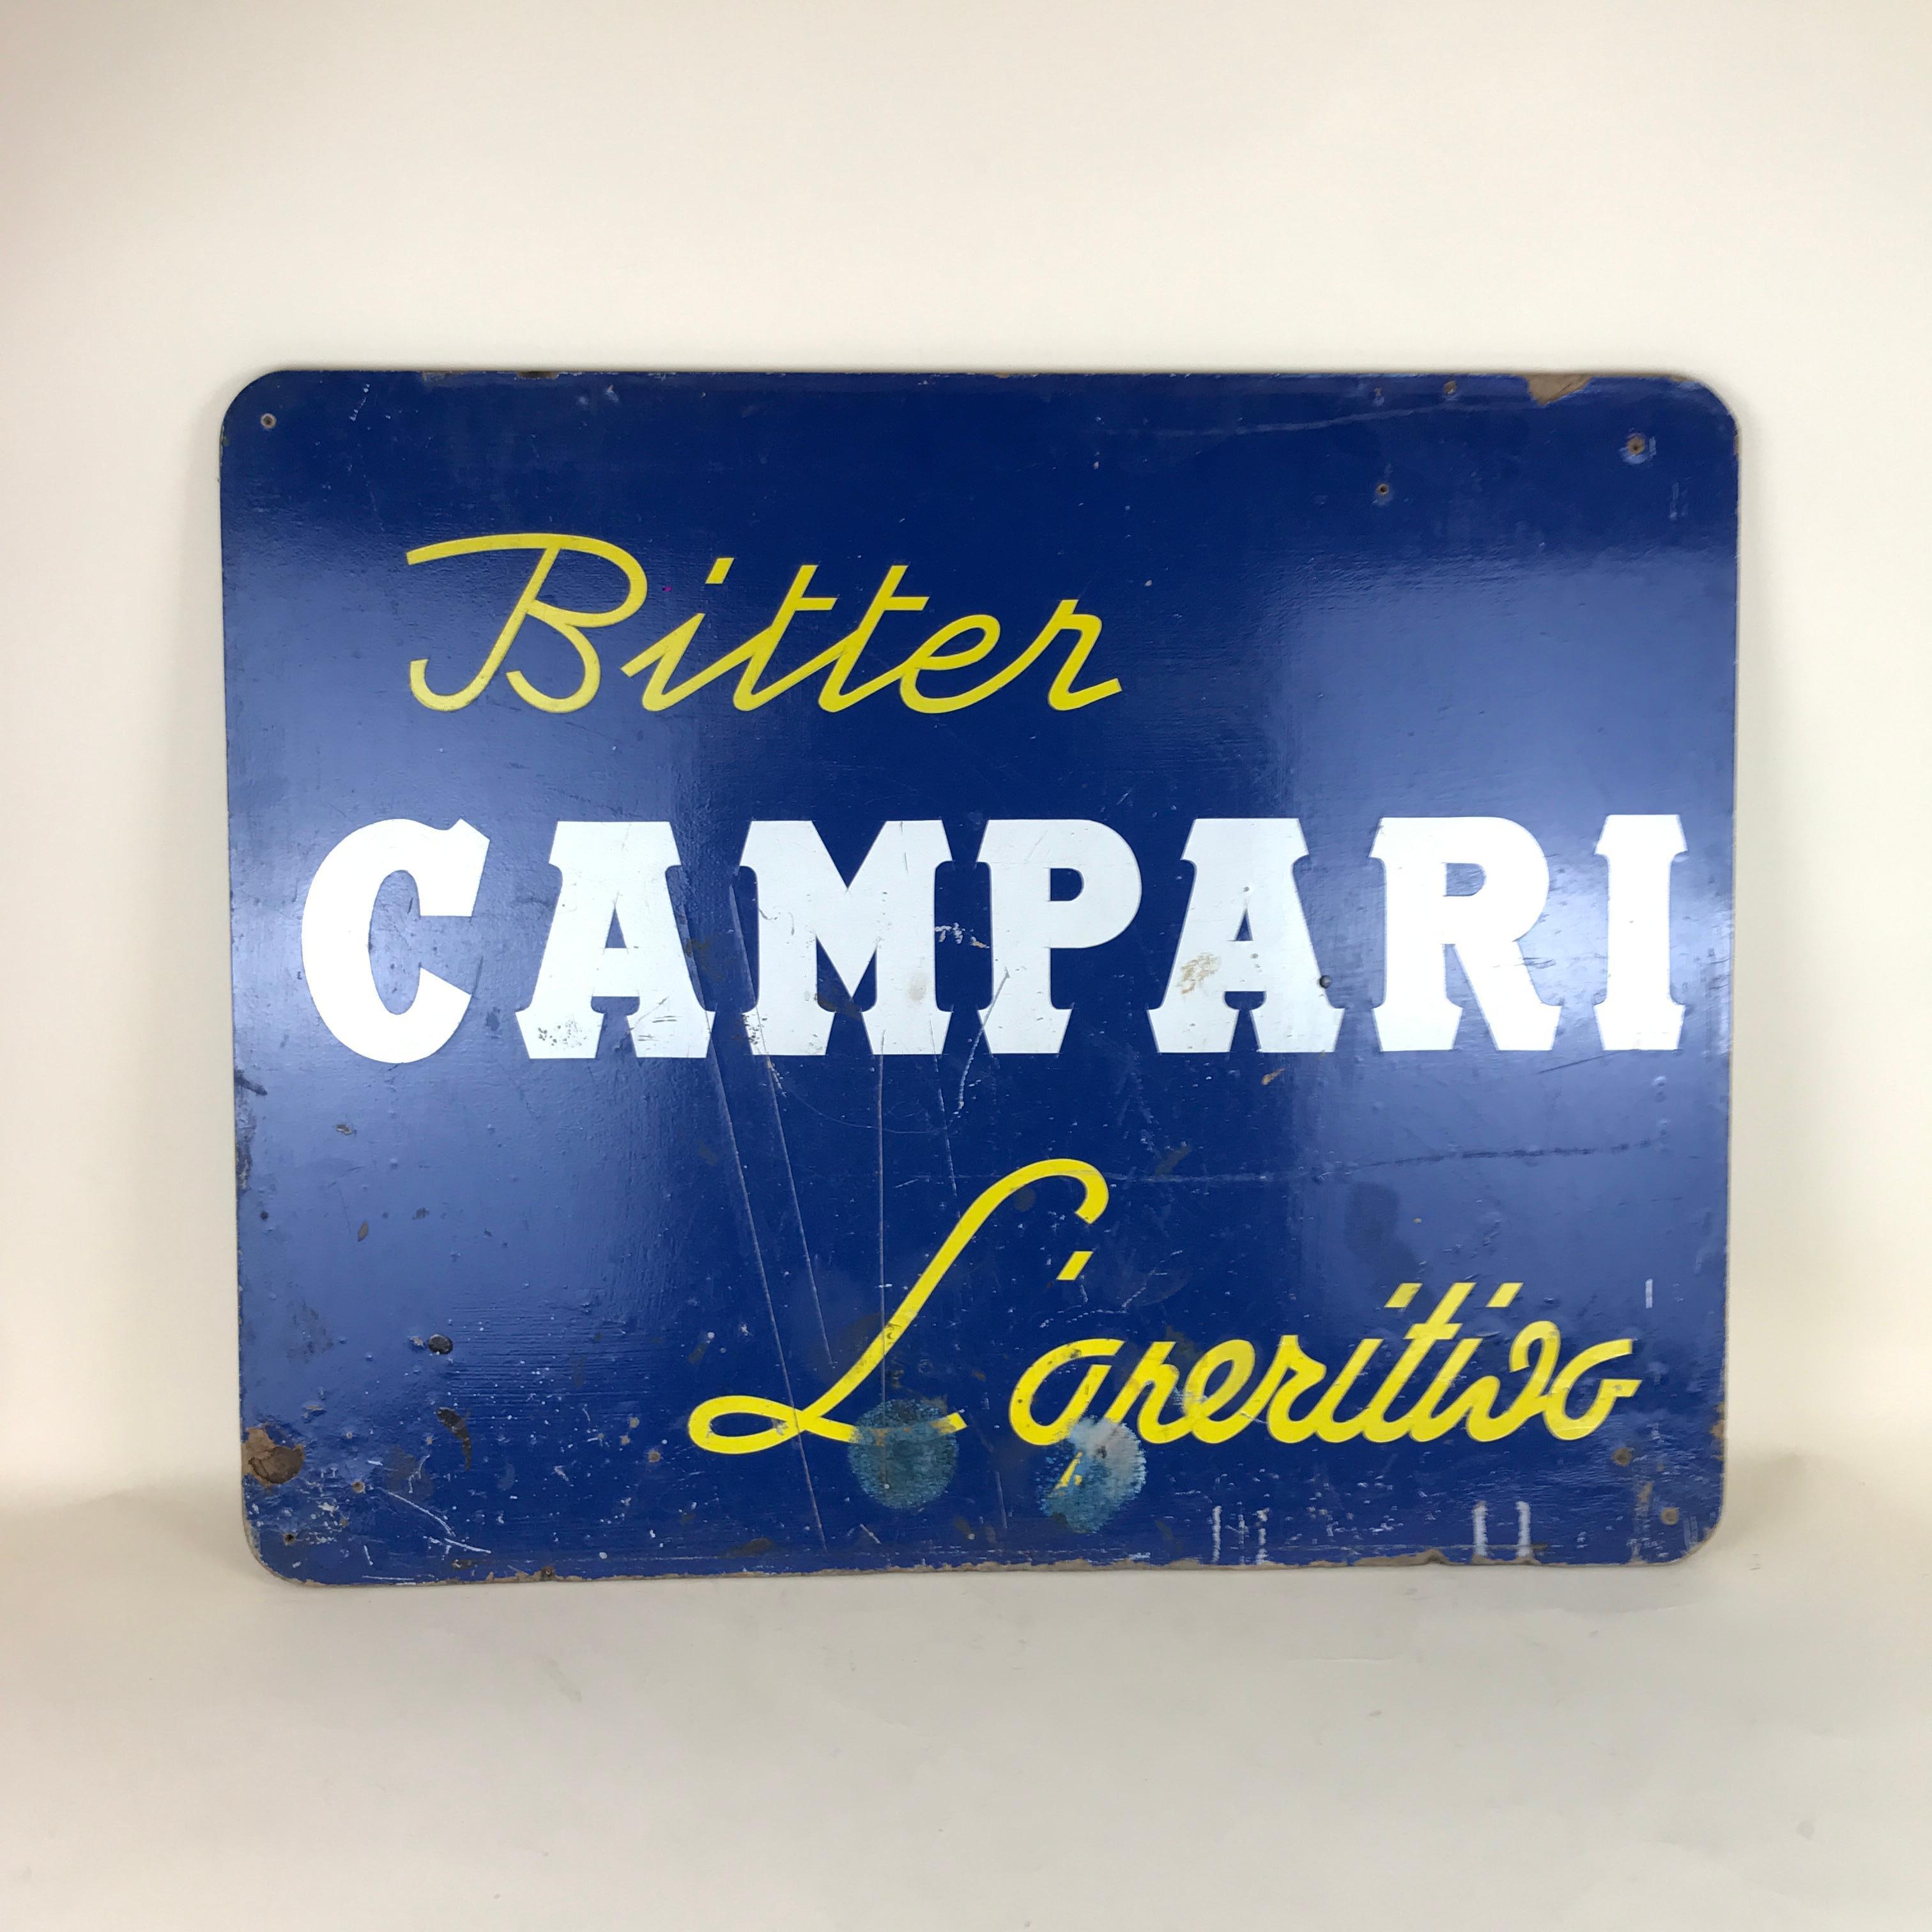 This vintage hard cardboard sign of Bitter Campari L' Aperitivo with yellow and white letters on blue background was produced in the 1960s in Italy.

Collector's note:

Campari is an Italian alcoholic liqueur, considered an apéritif obtained